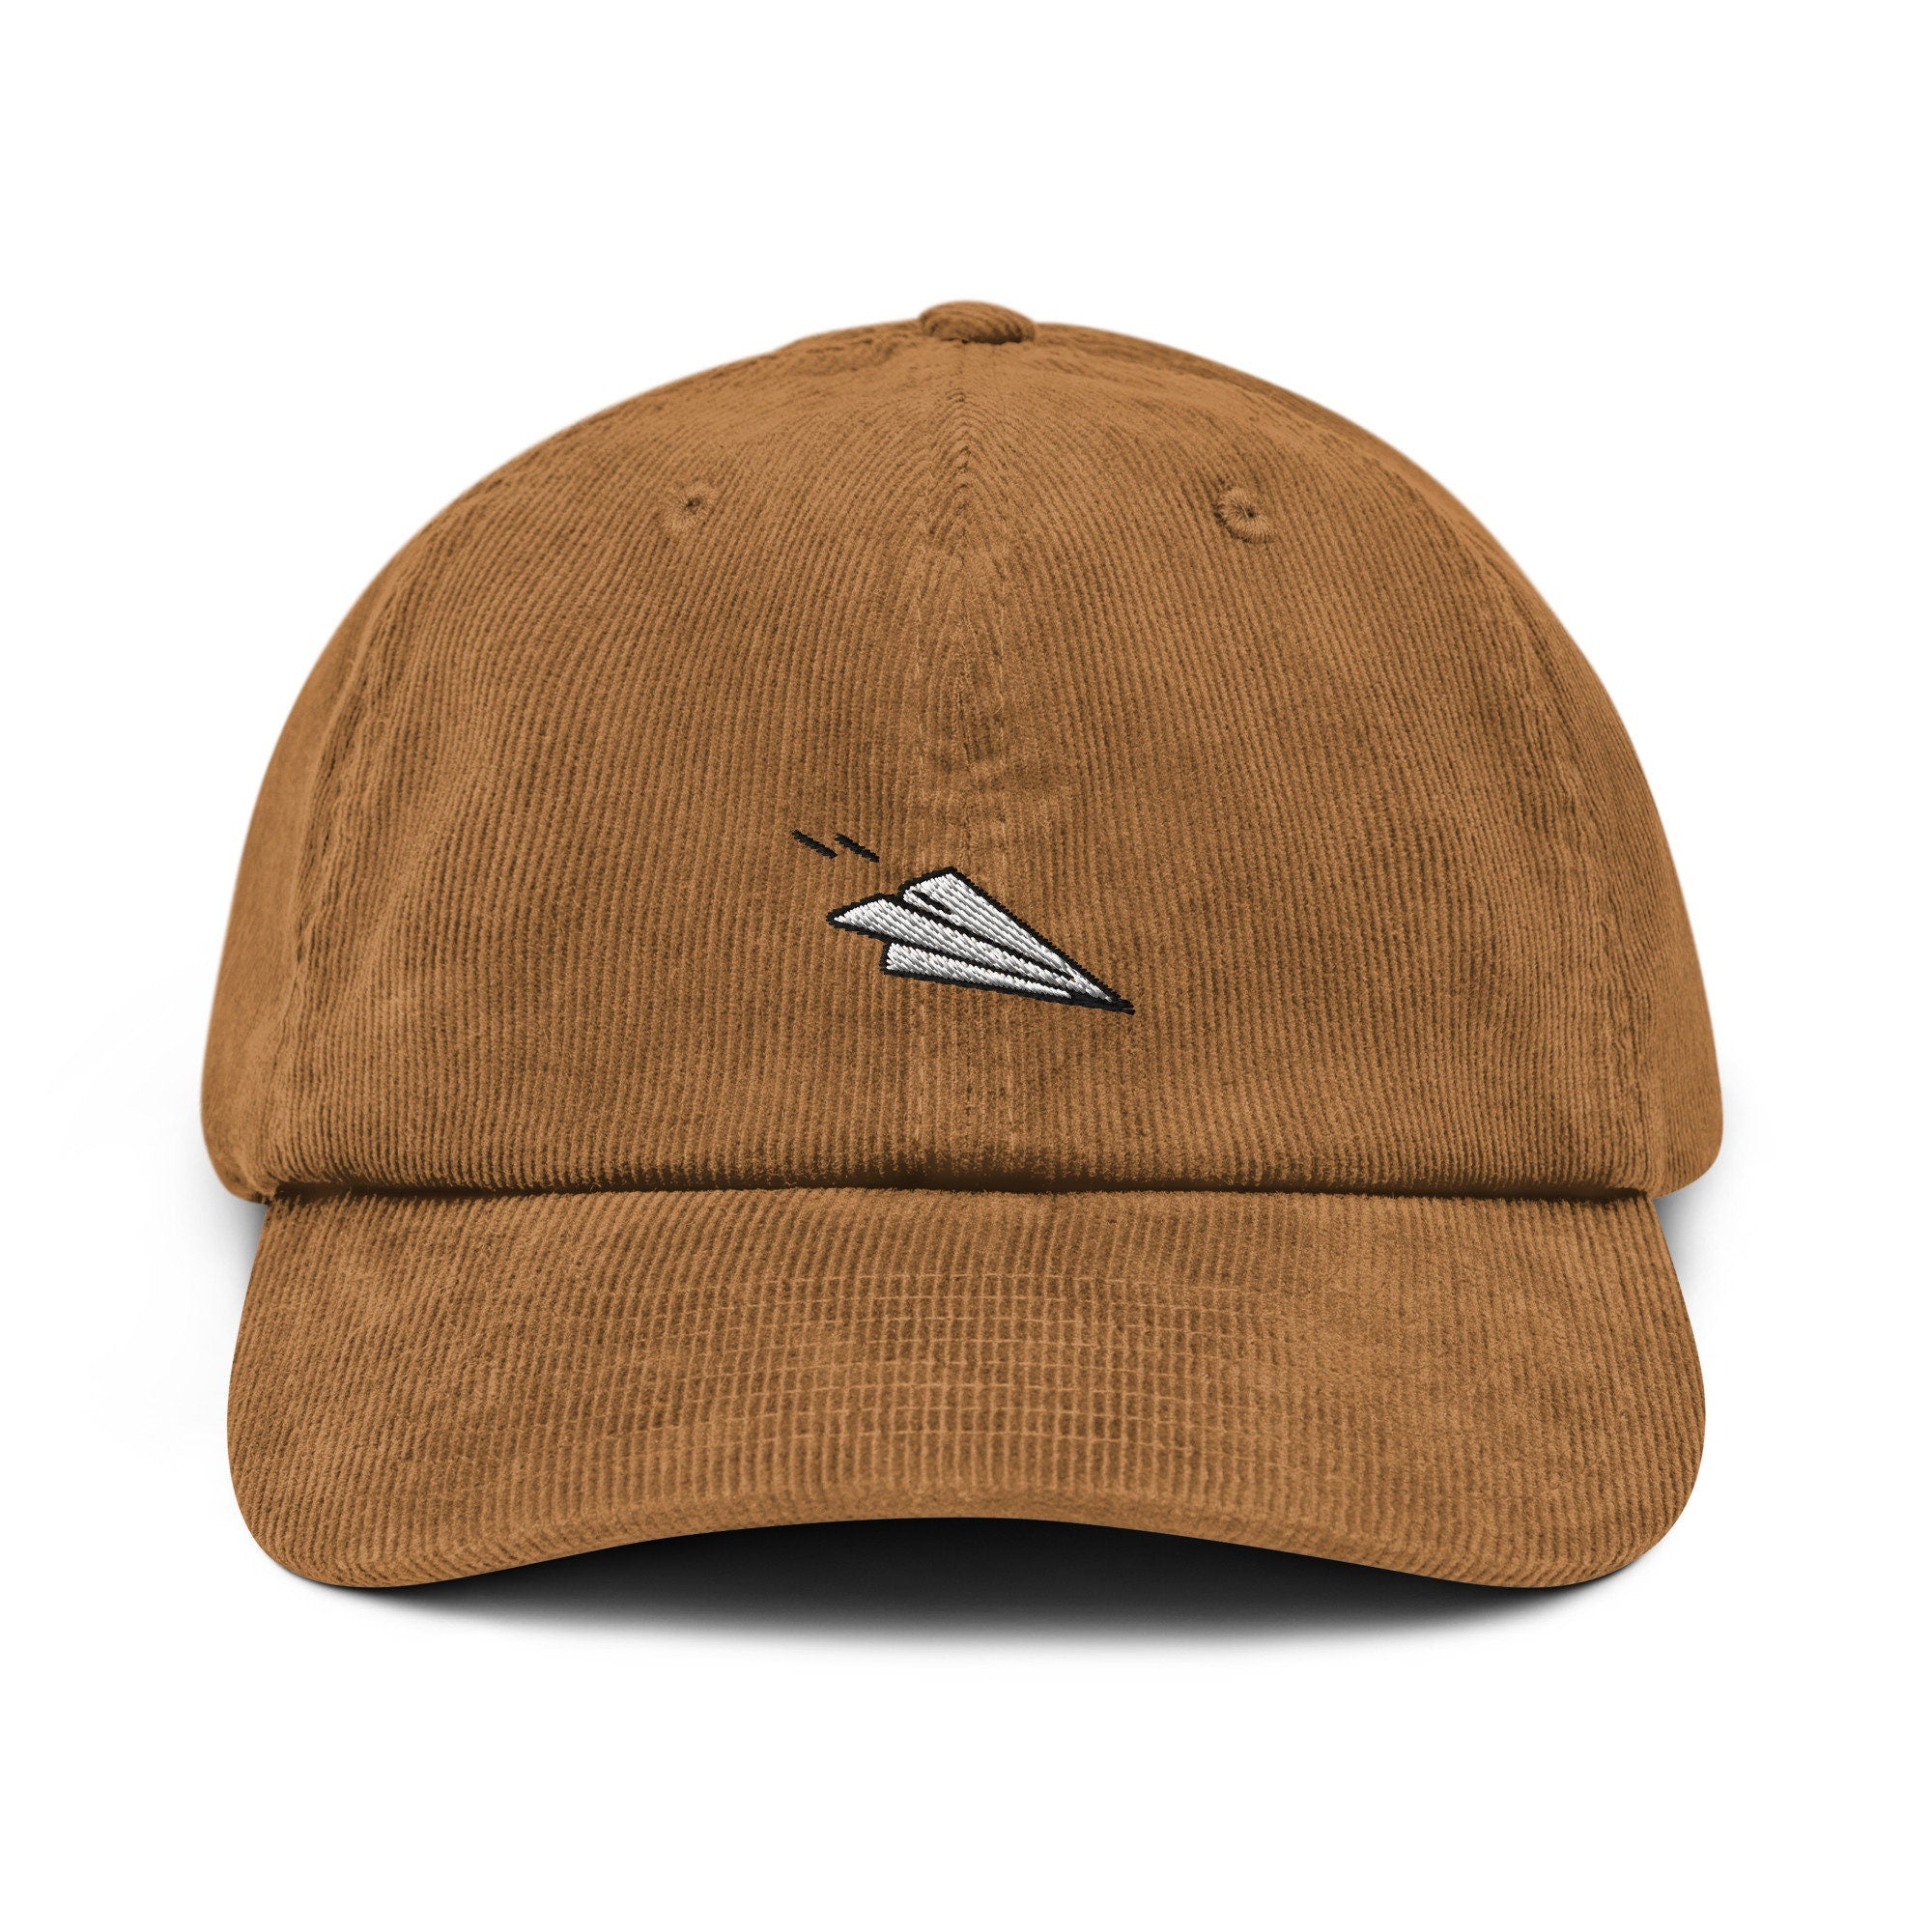 Paper Airplane Corduroy Hat, Handmade Embroidered Corduroy Dad Cap - Multiple Colors